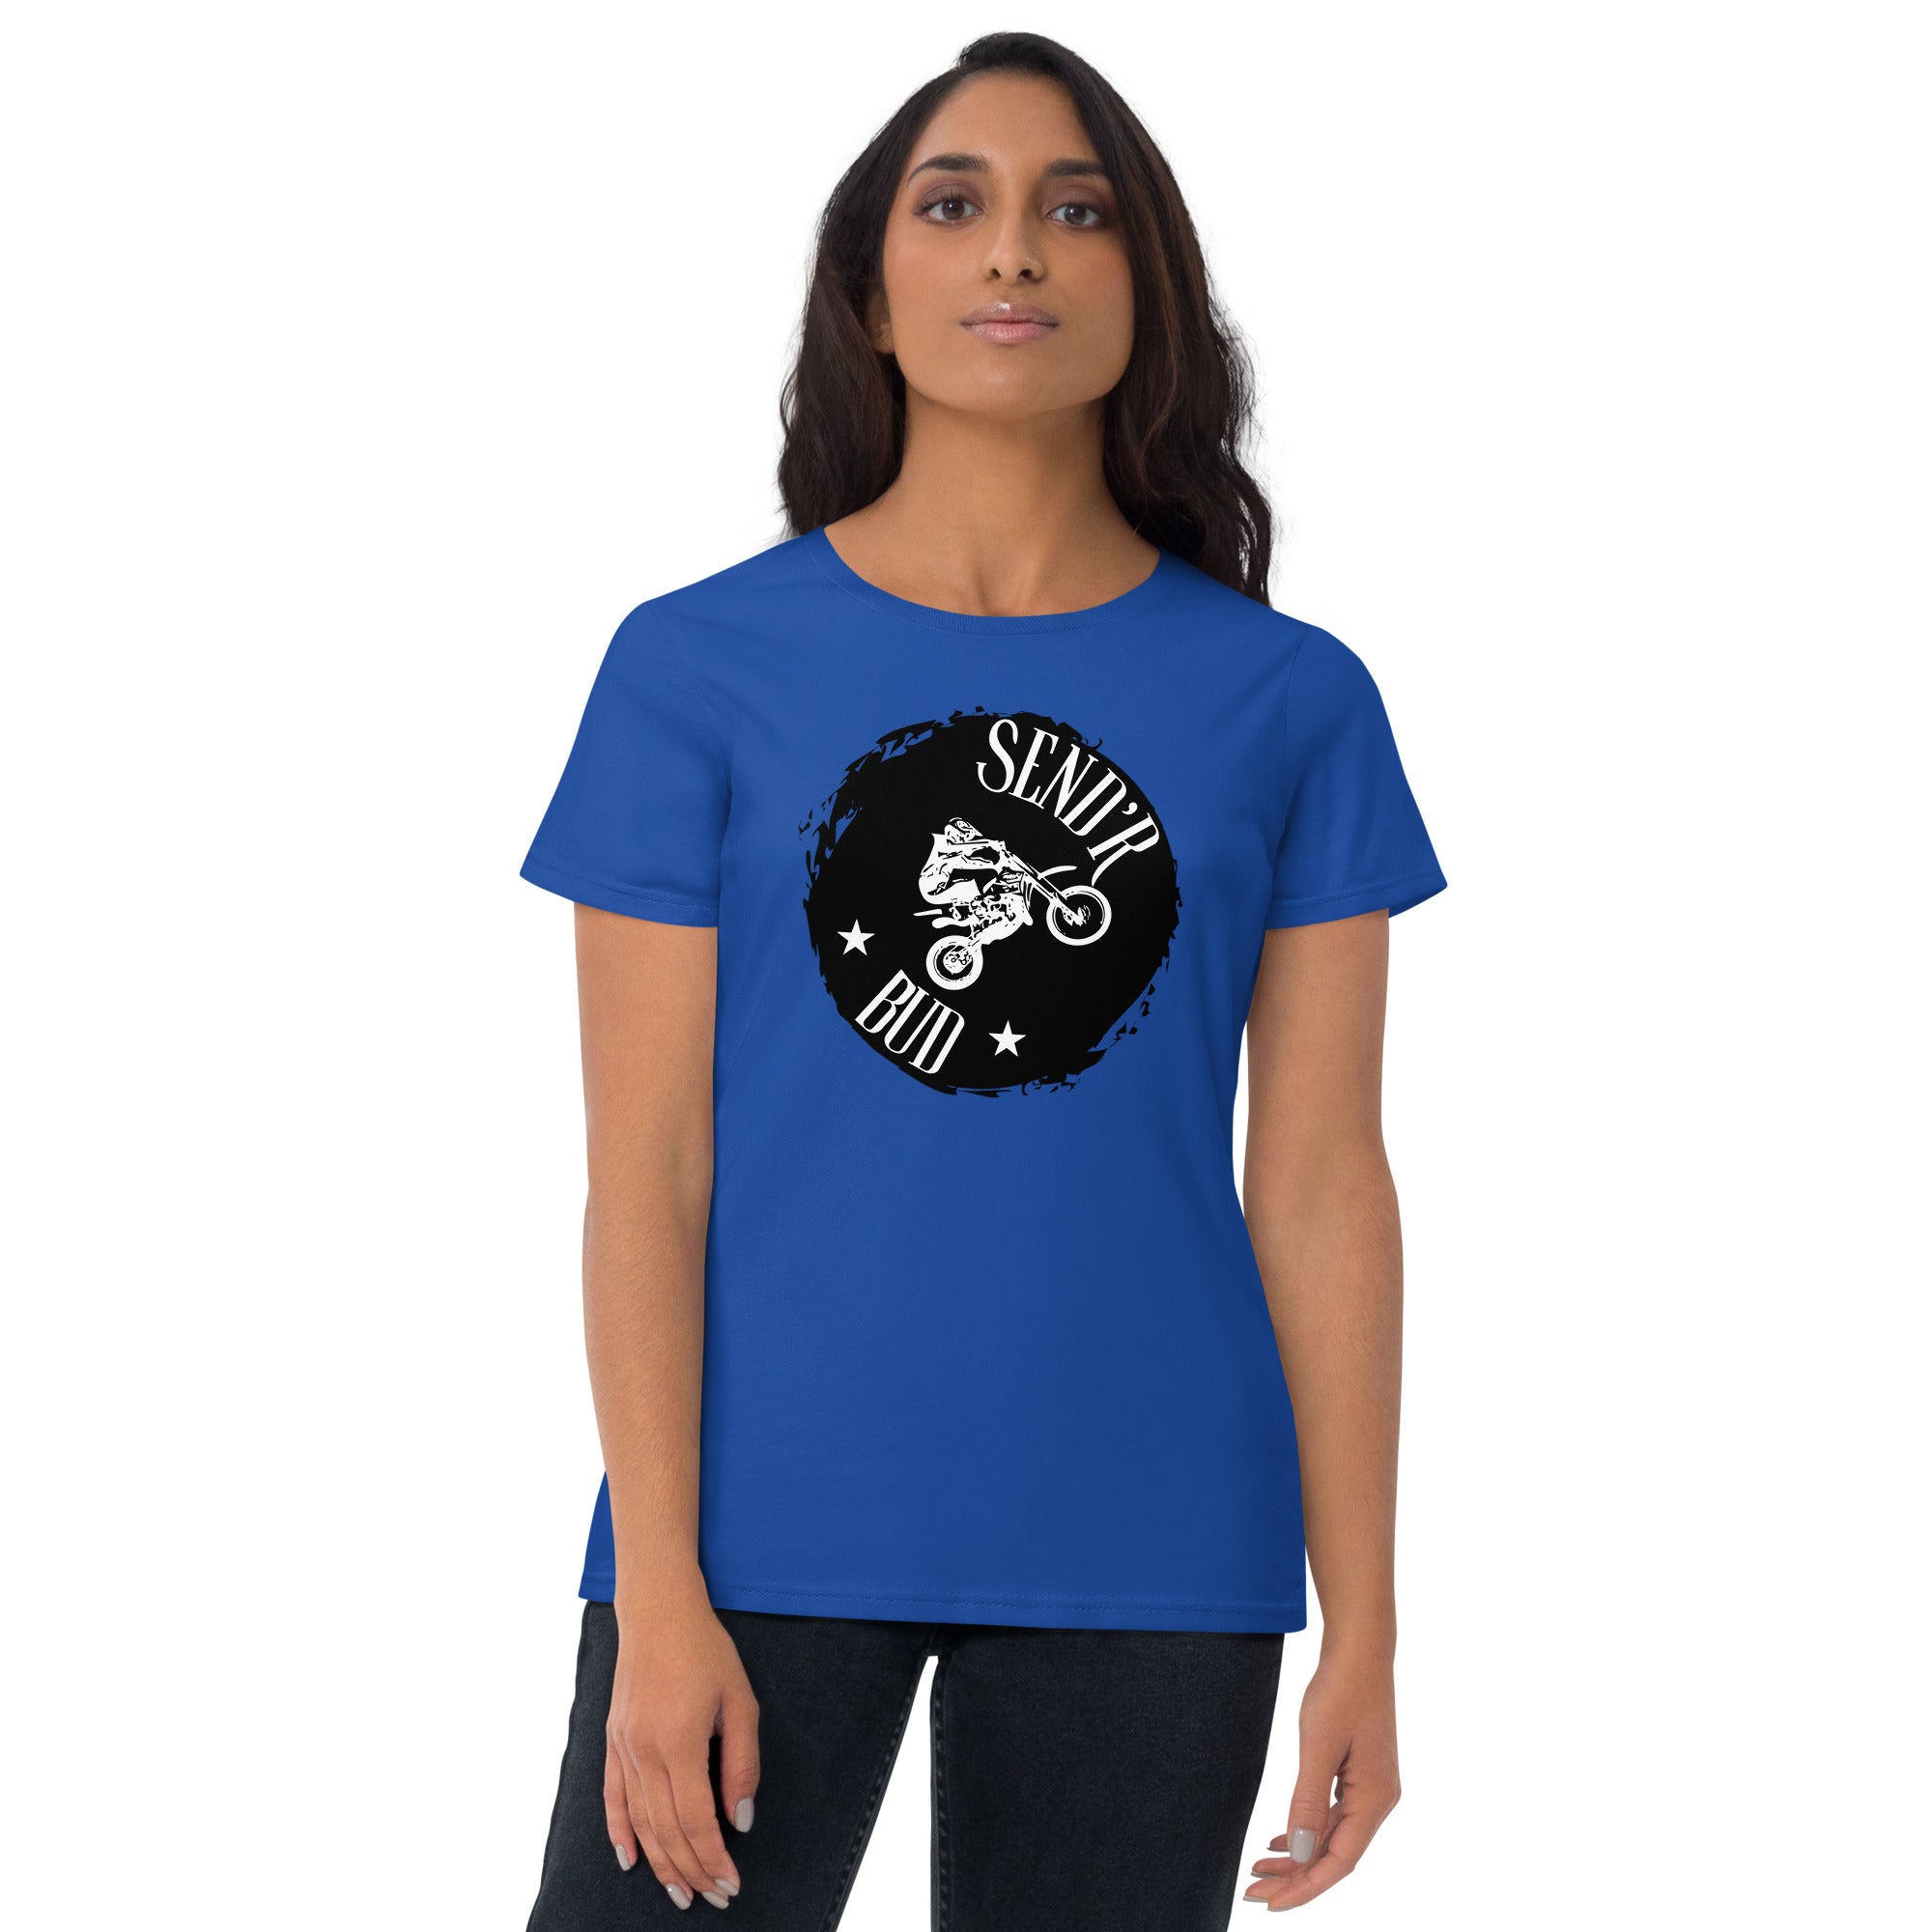 Send'r Bud Women's Fitted T-Shirt